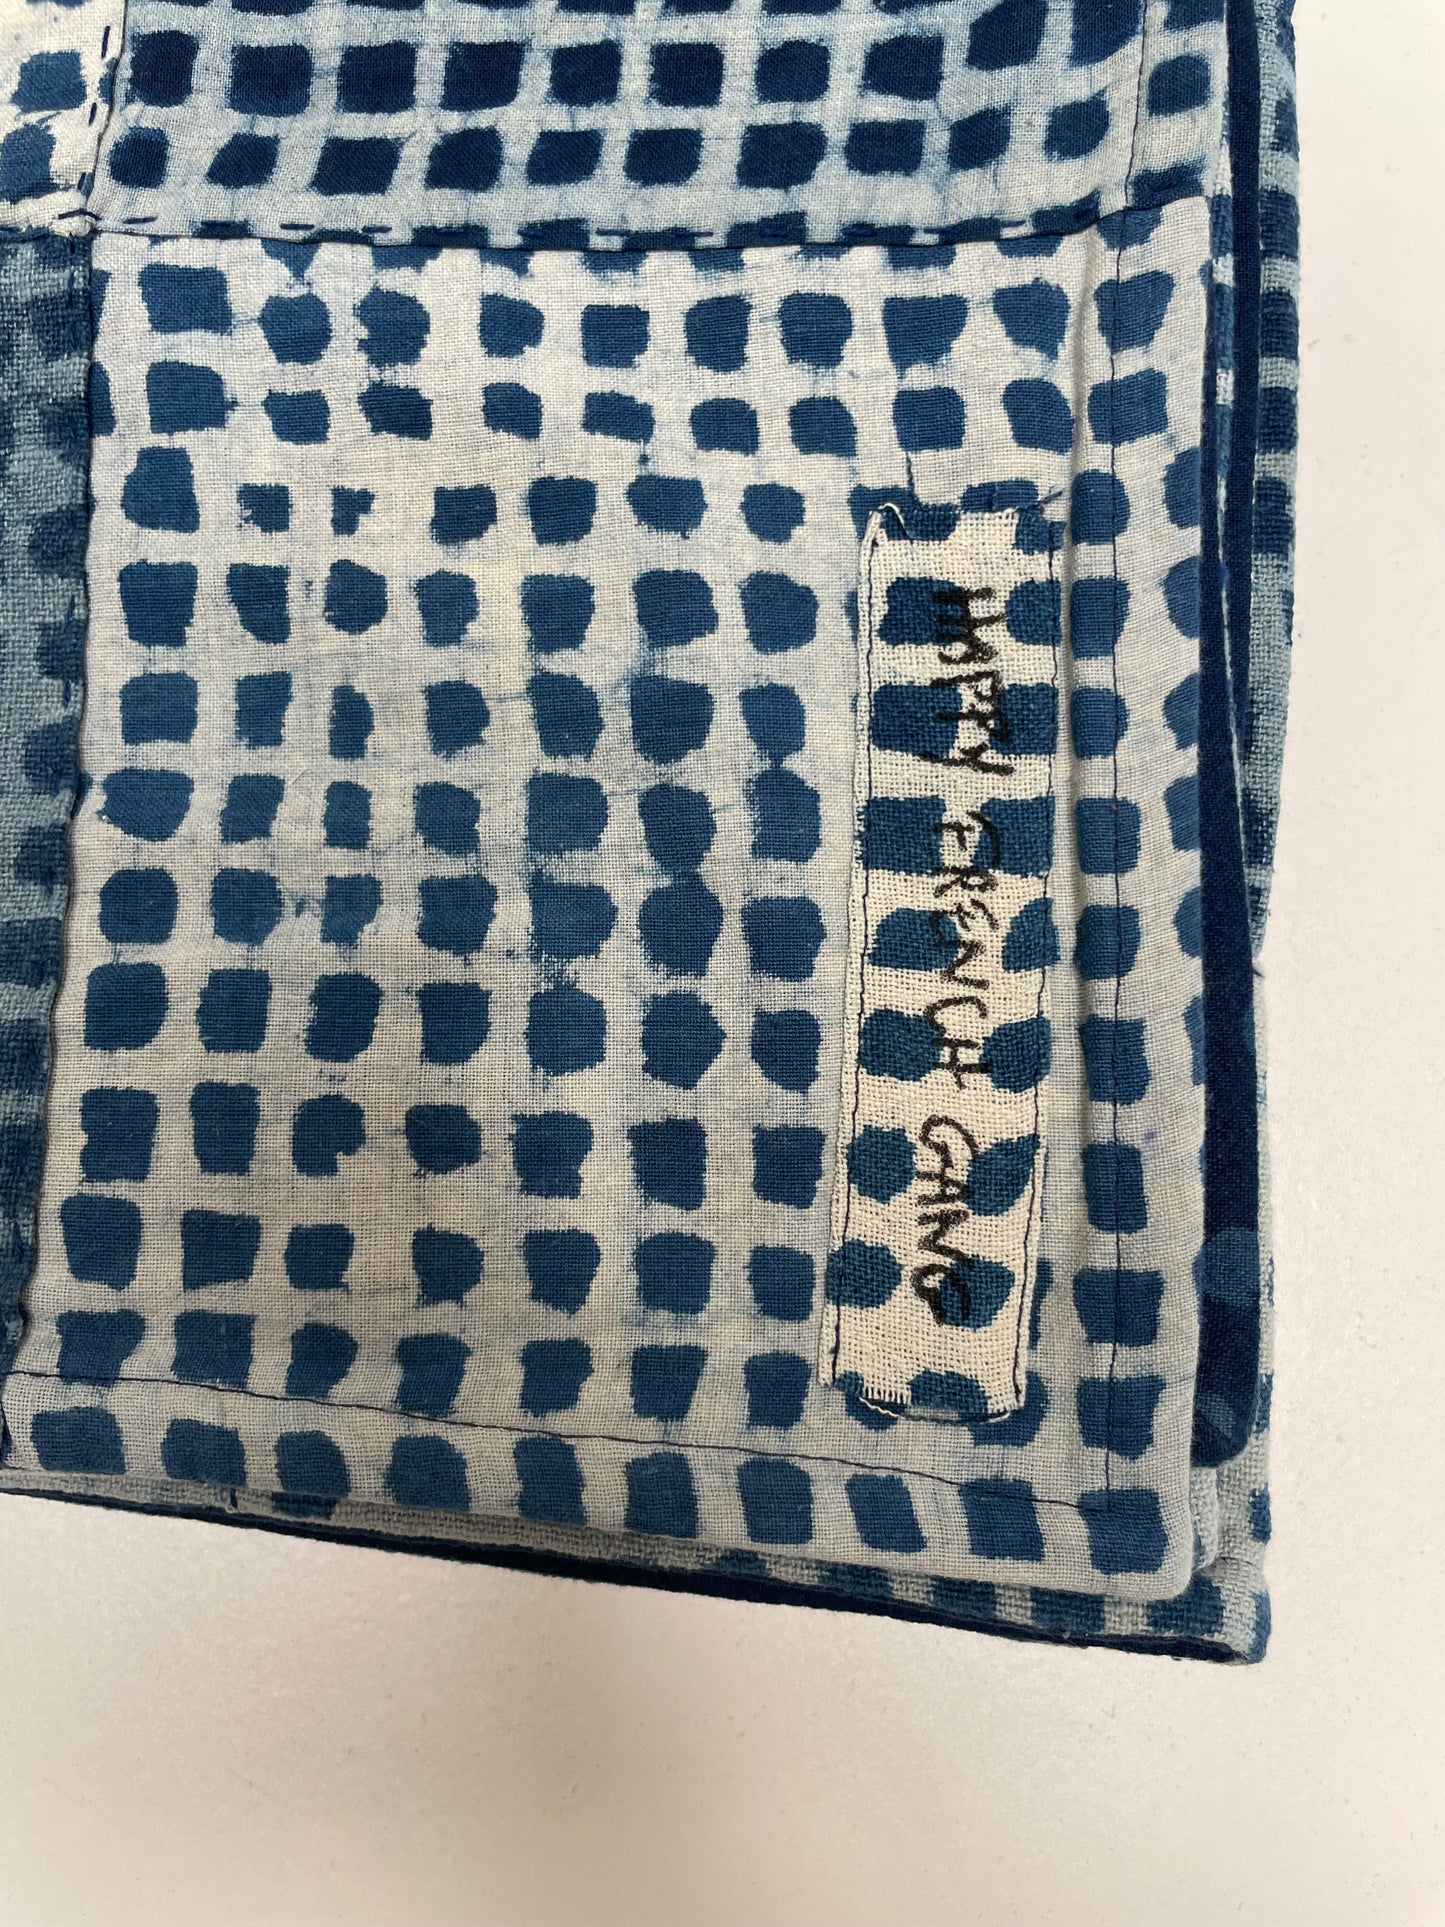 One of a Kind Square Indigo Quilt 75x55in